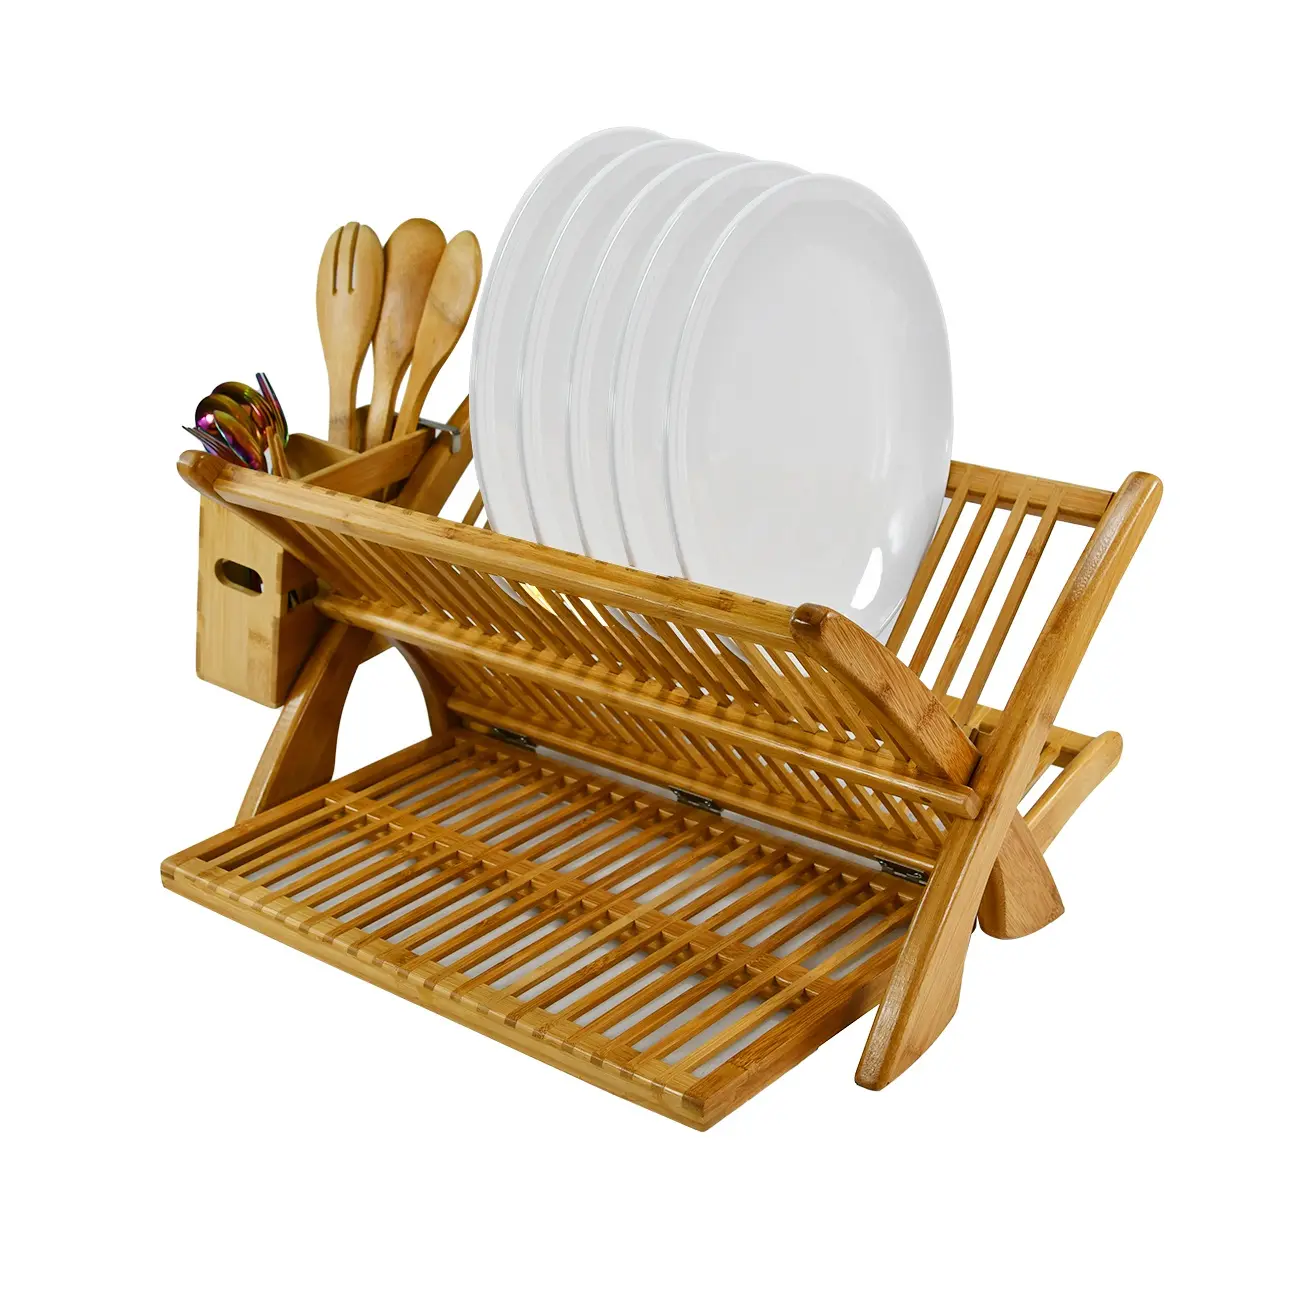 Wooden Dish Drying Holder Bamboo Plate Drainer 3 Tier Collapsible Dish Rack with Utensil Holder for Kitchen Counter